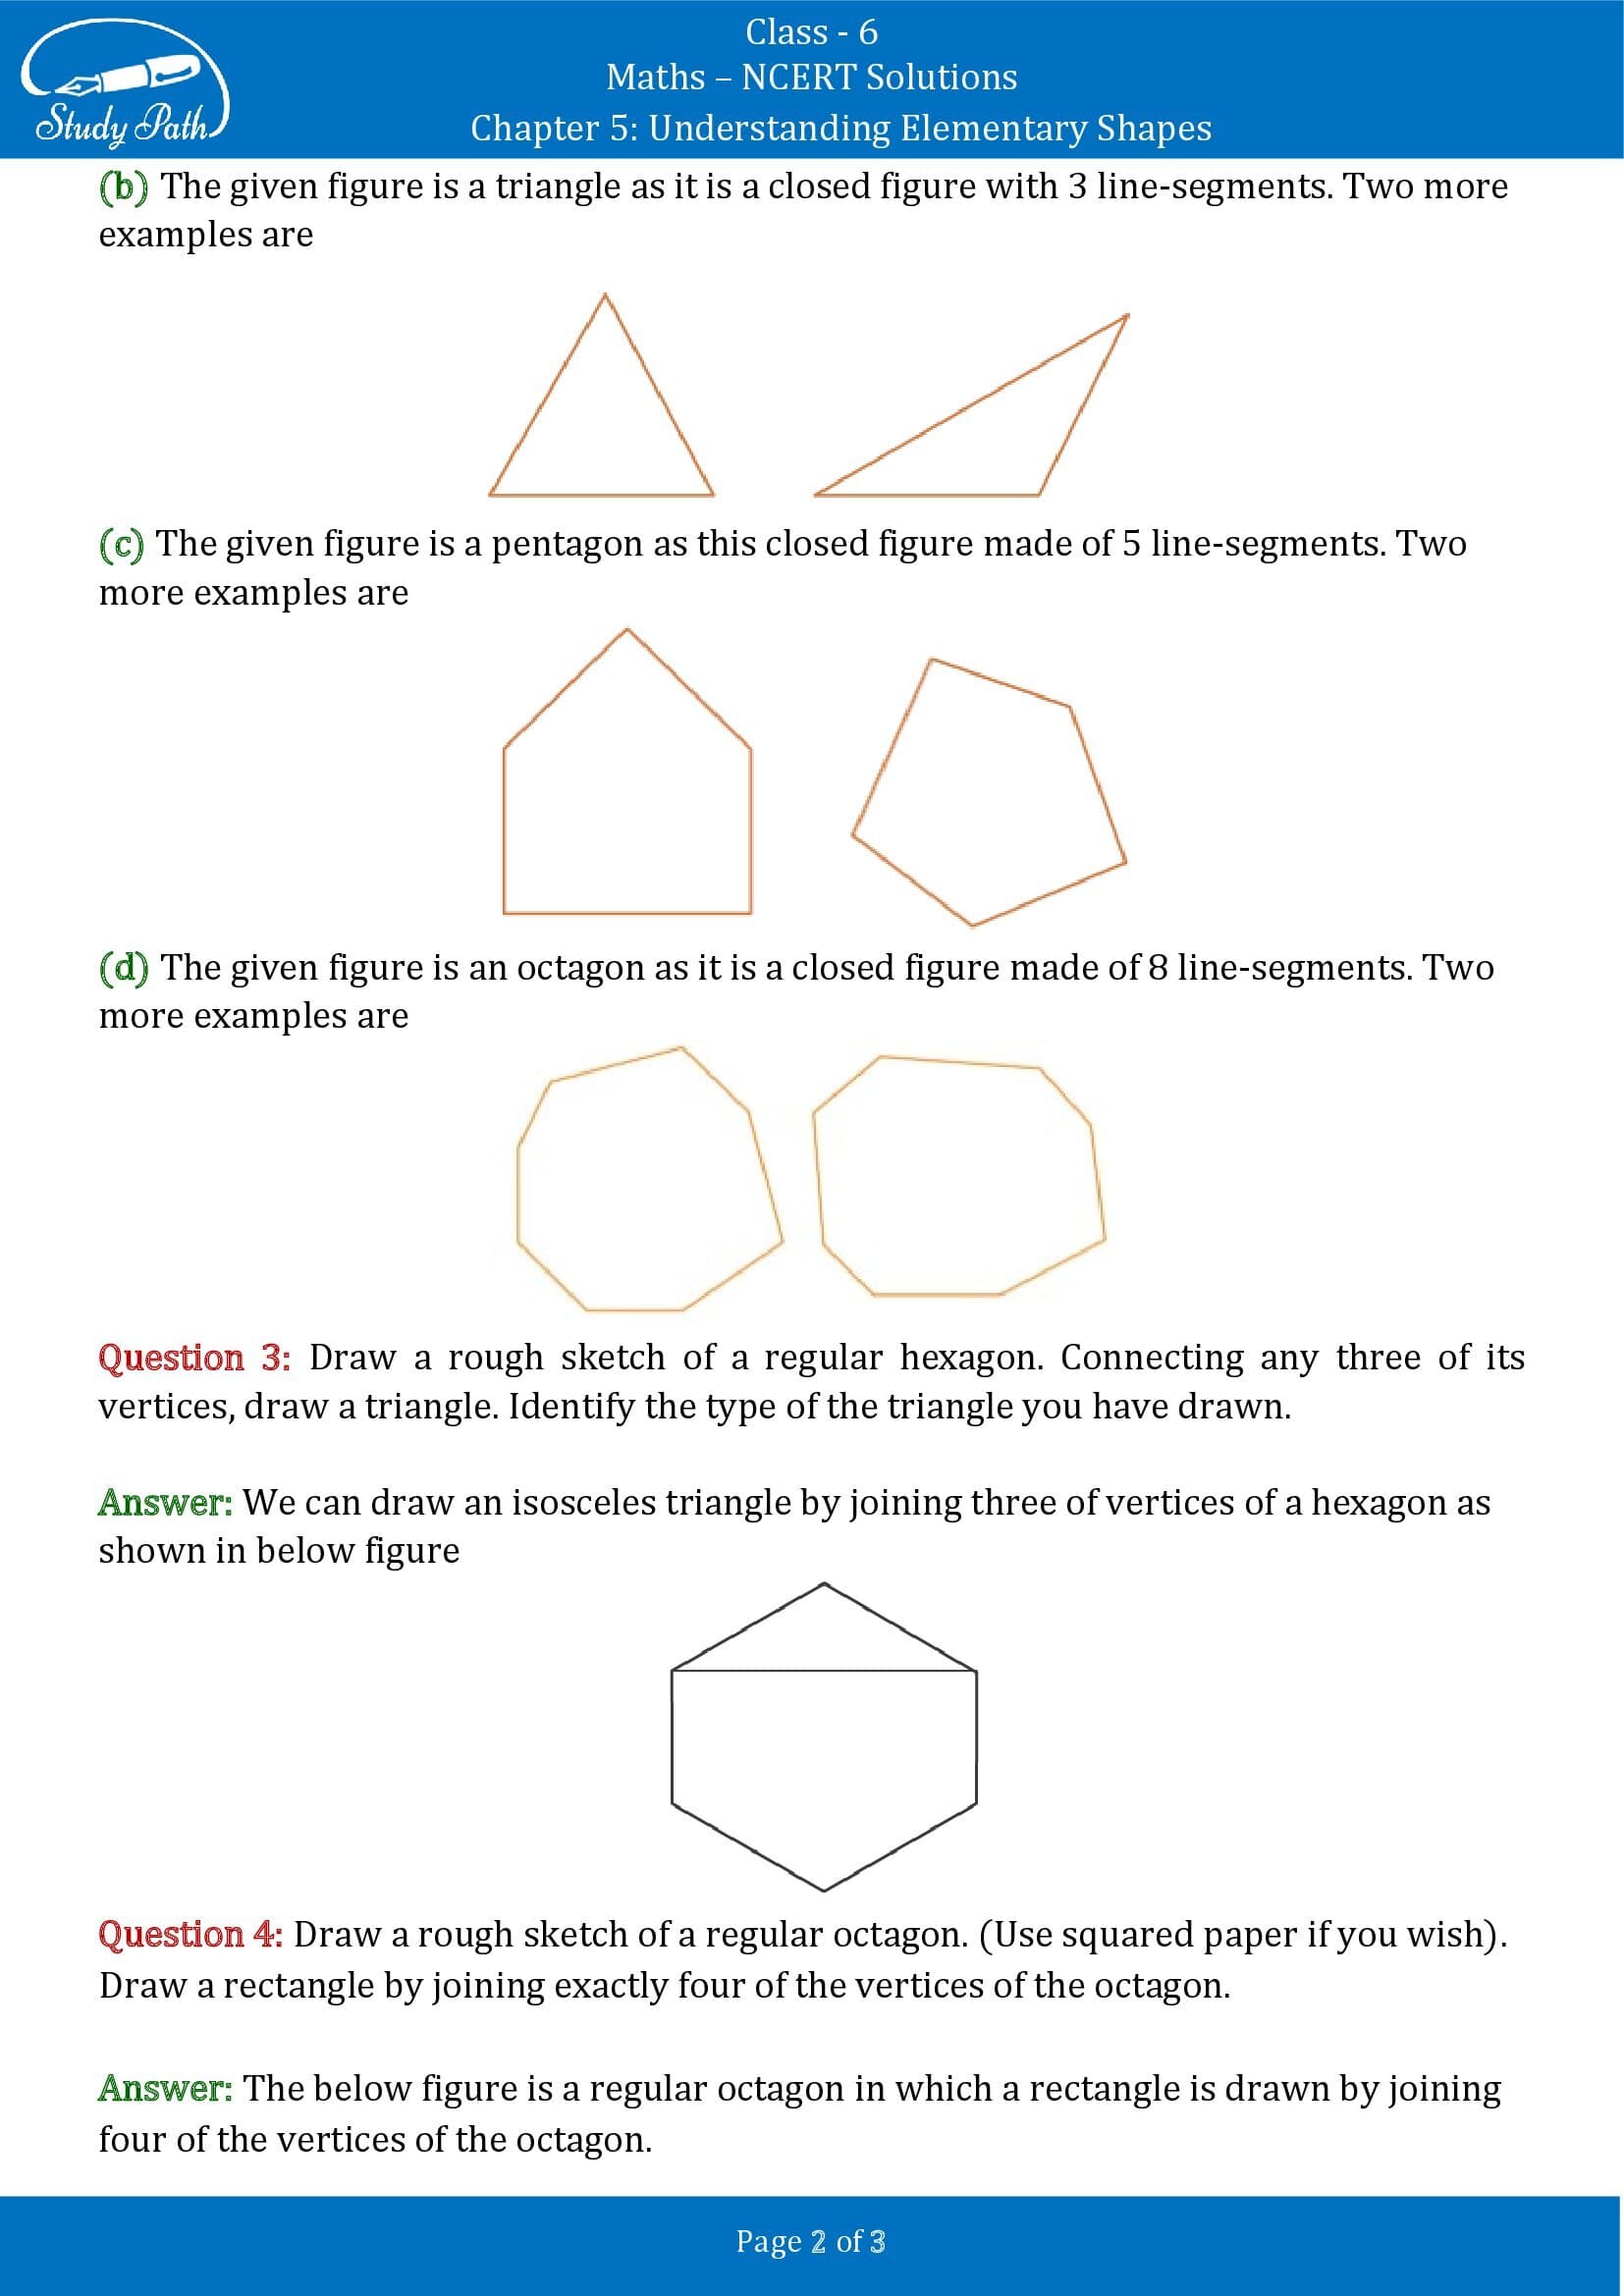 NCERT Solutions for Class 6 Maths Chapter 5 Understanding Elementary Shapes Exercise 5.8 00002